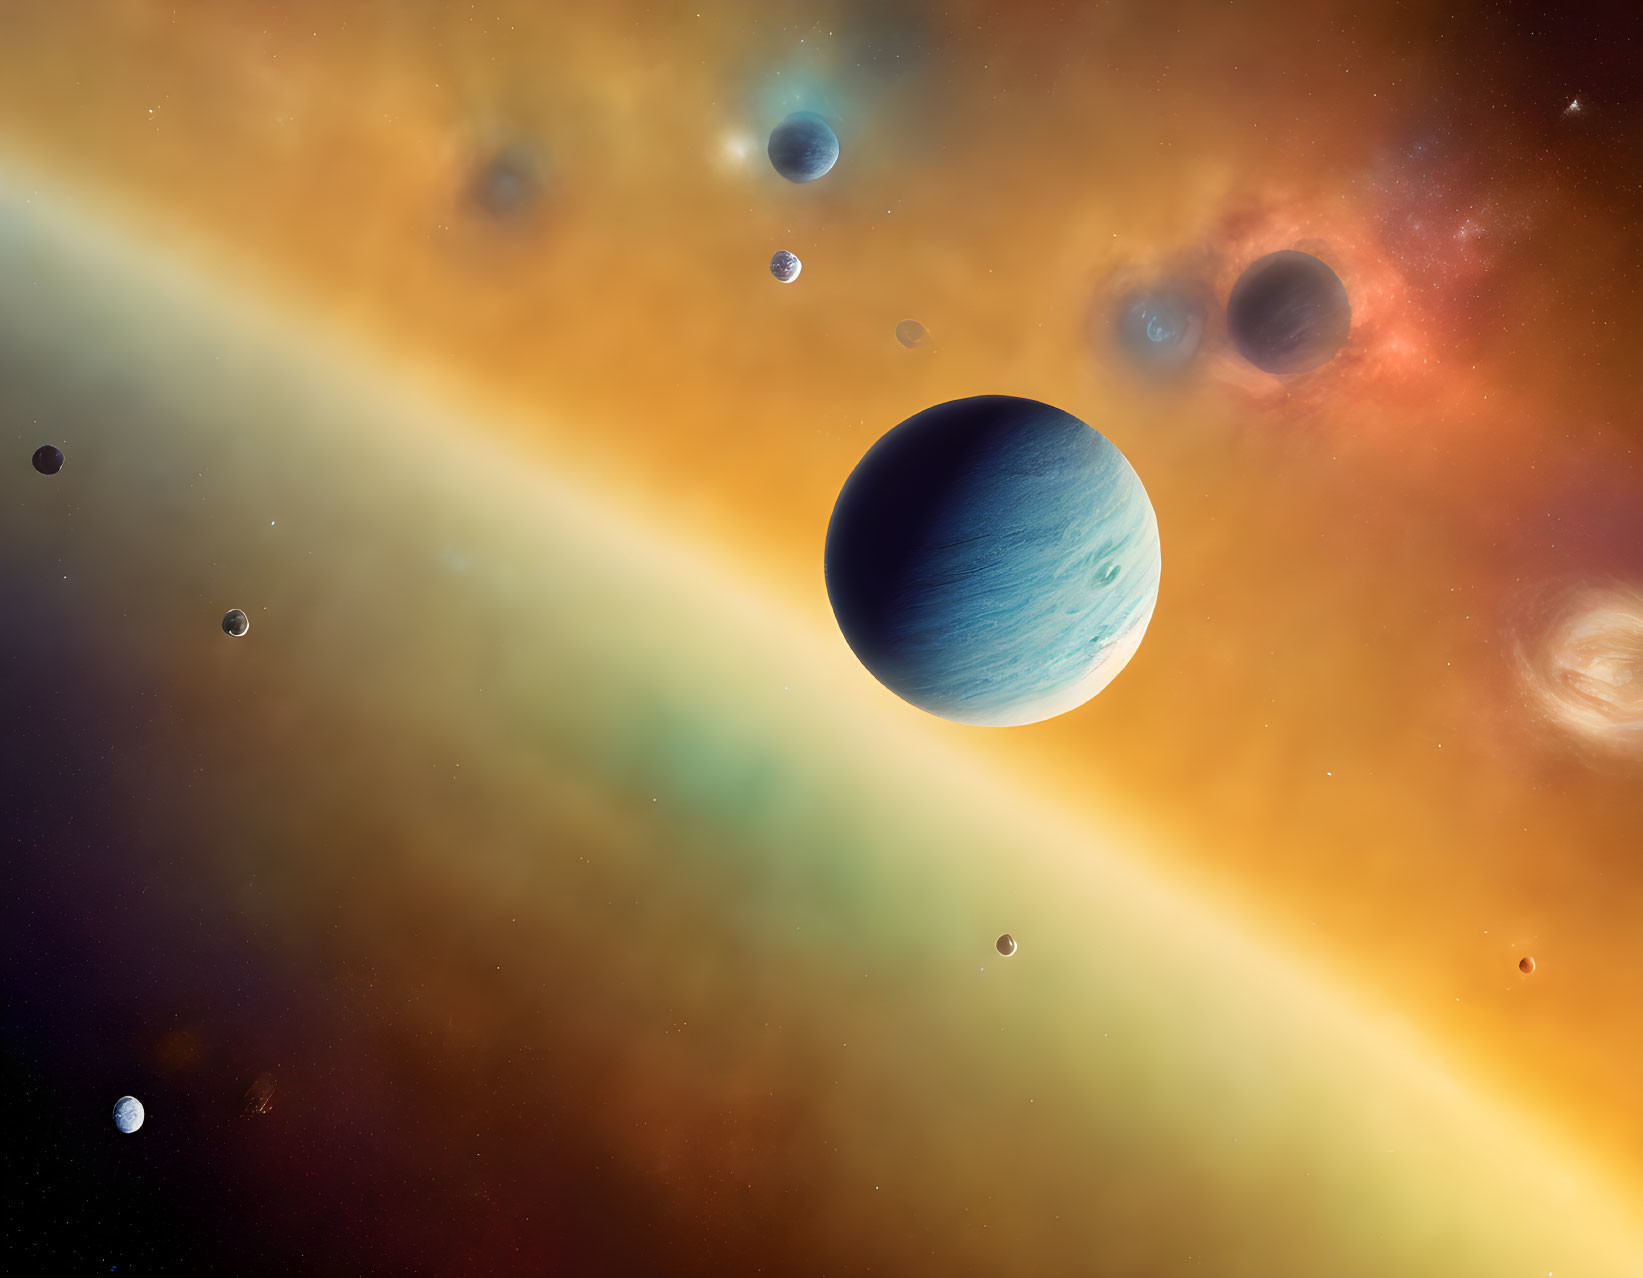 Colorful Space Scene with Blue Planet and Moons in Cosmic Backdrop